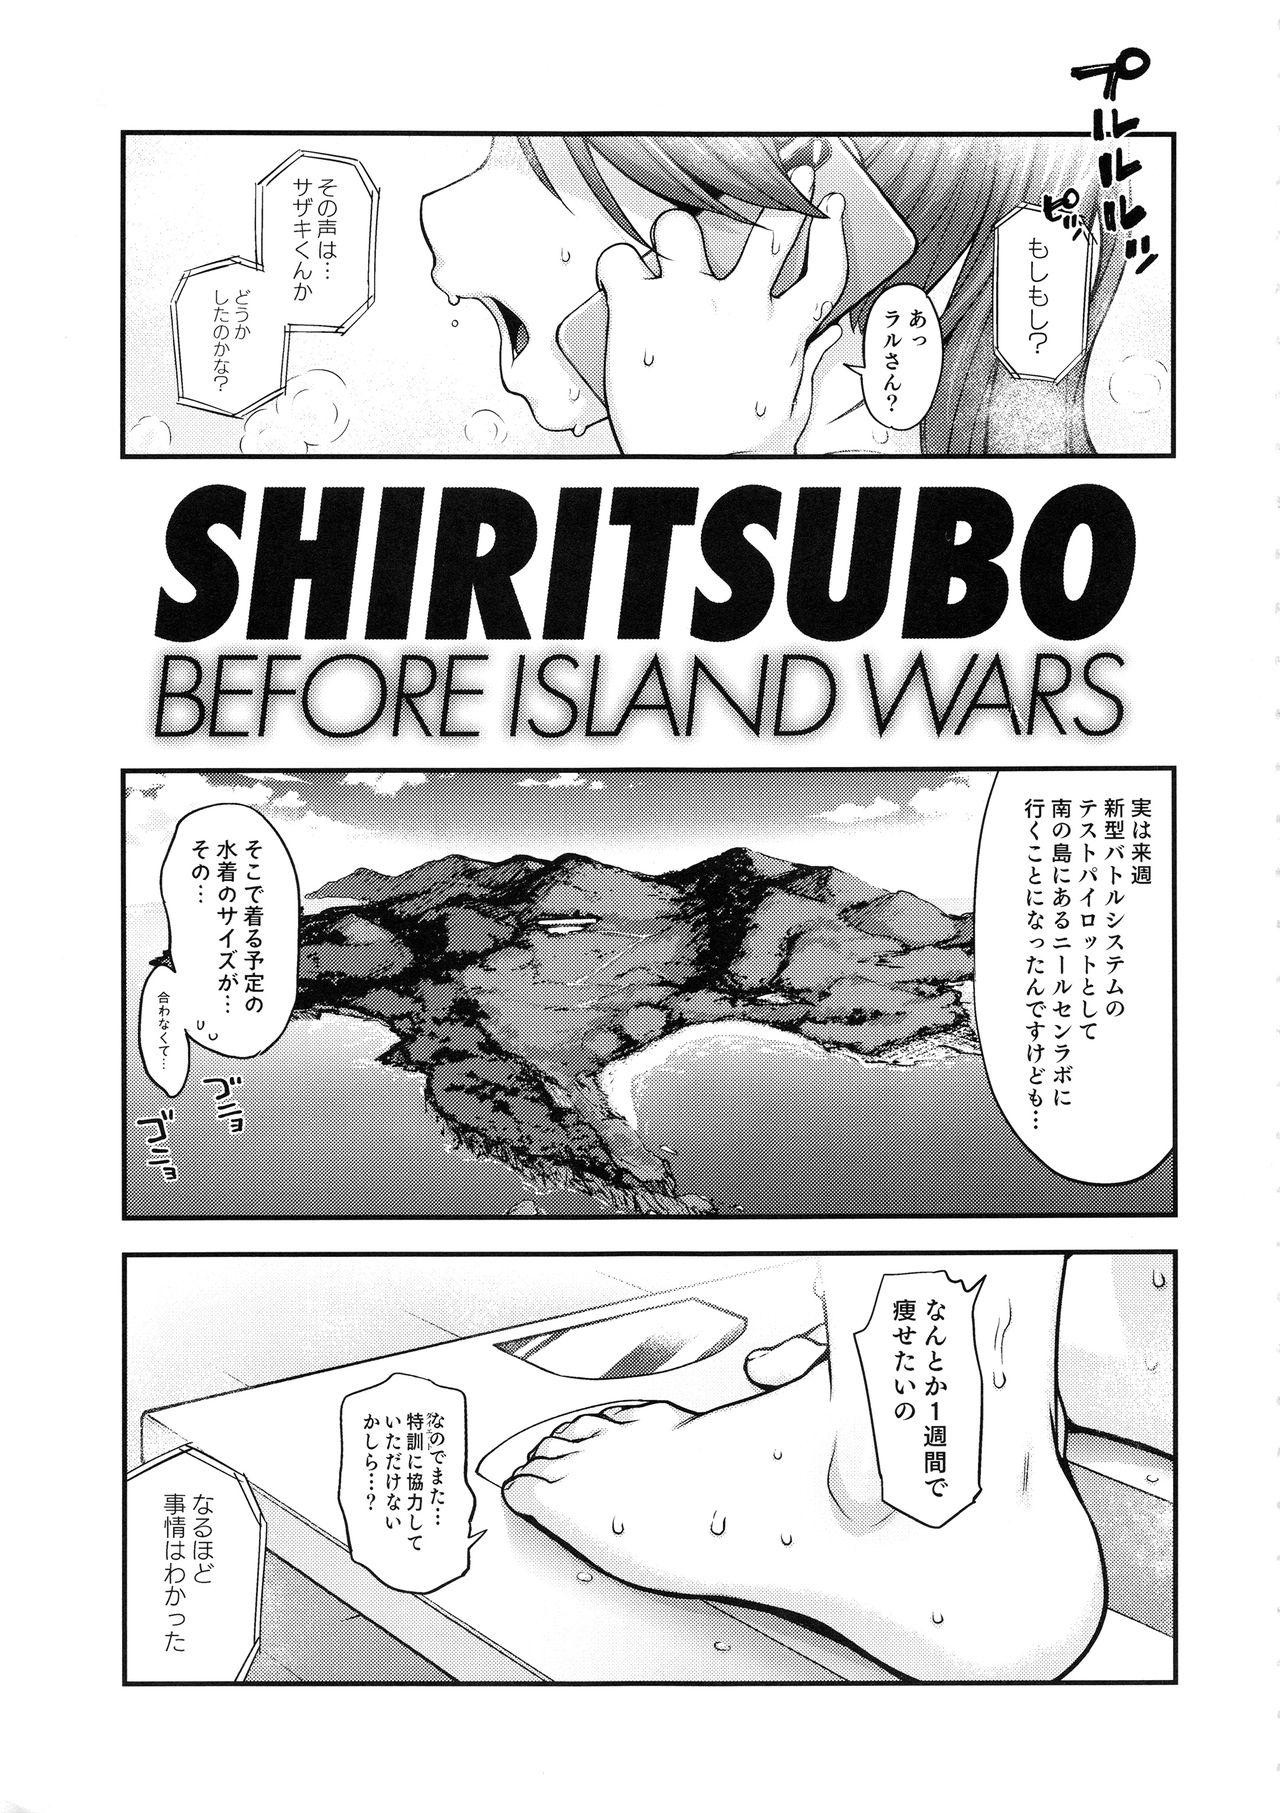 Fantasy SHIRITSUBO - Gundam build fighters try Point Of View - Page 2